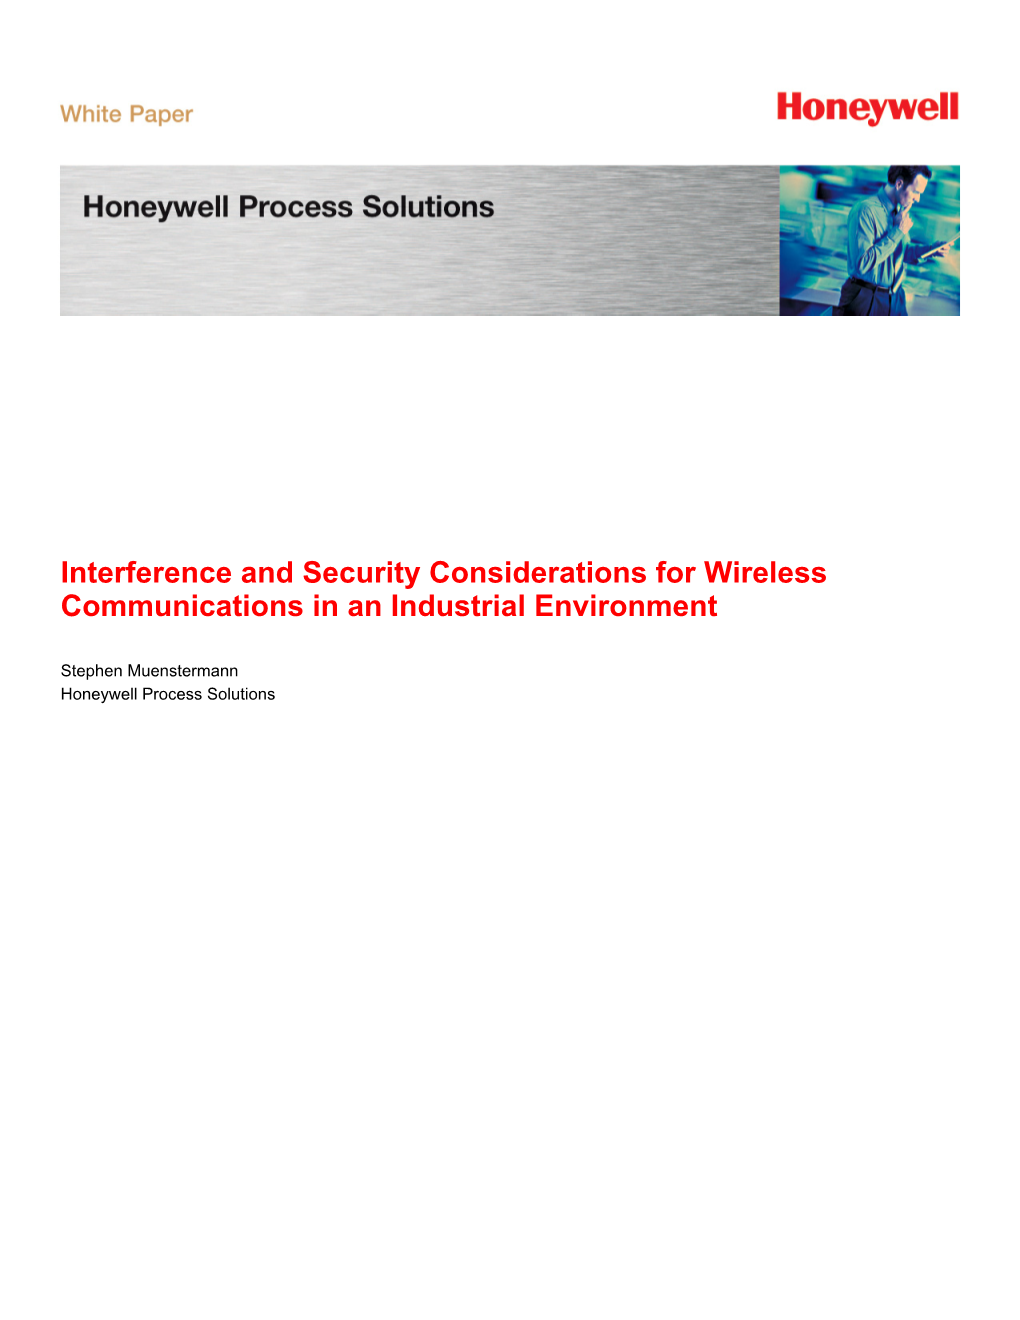 Interference and Security Considerations for Wireless Communications in an Industrial Environment